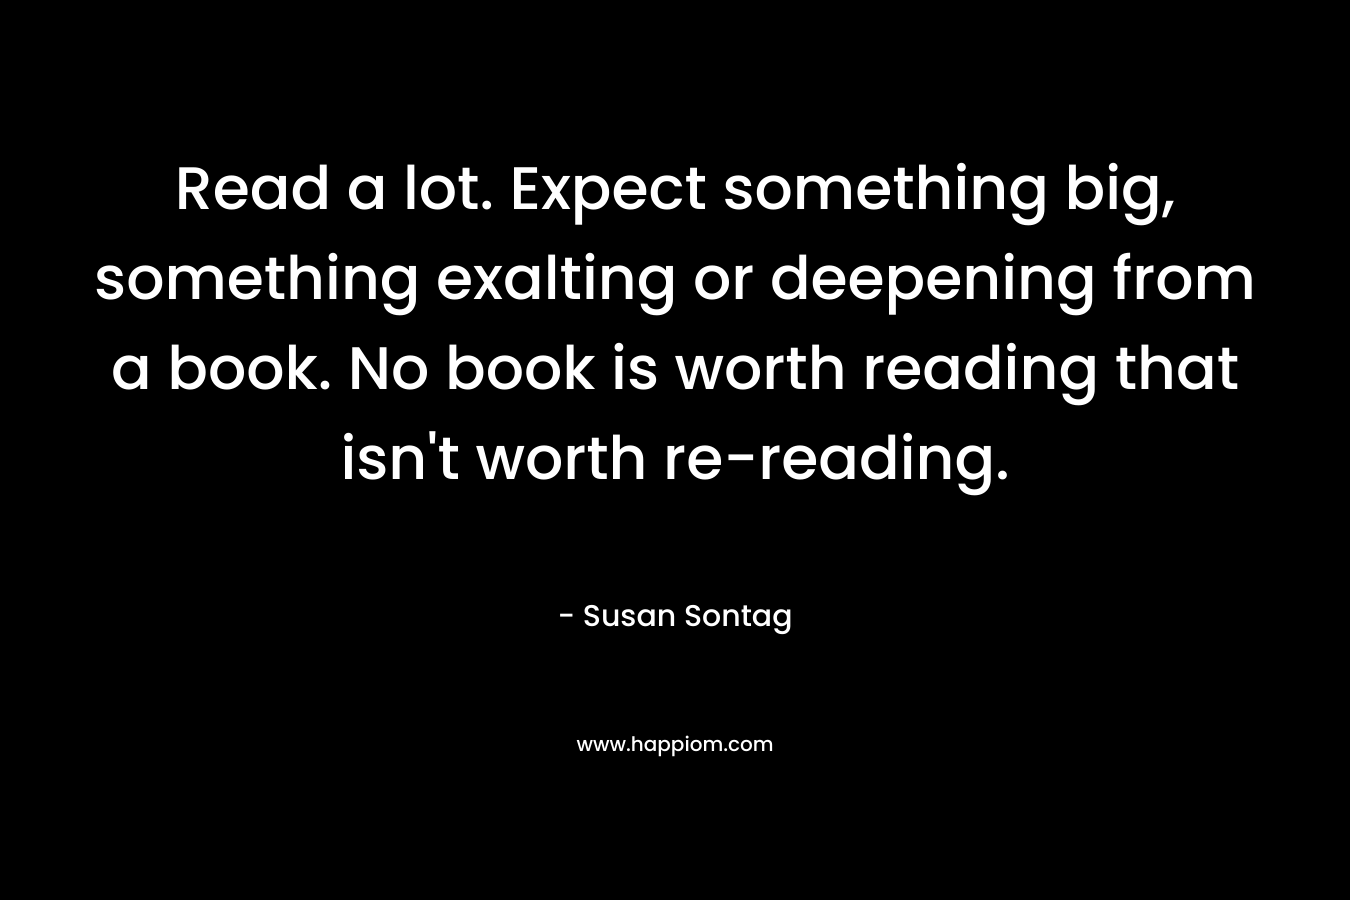 Read a lot. Expect something big, something exalting or deepening from a book. No book is worth reading that isn't worth re-reading.